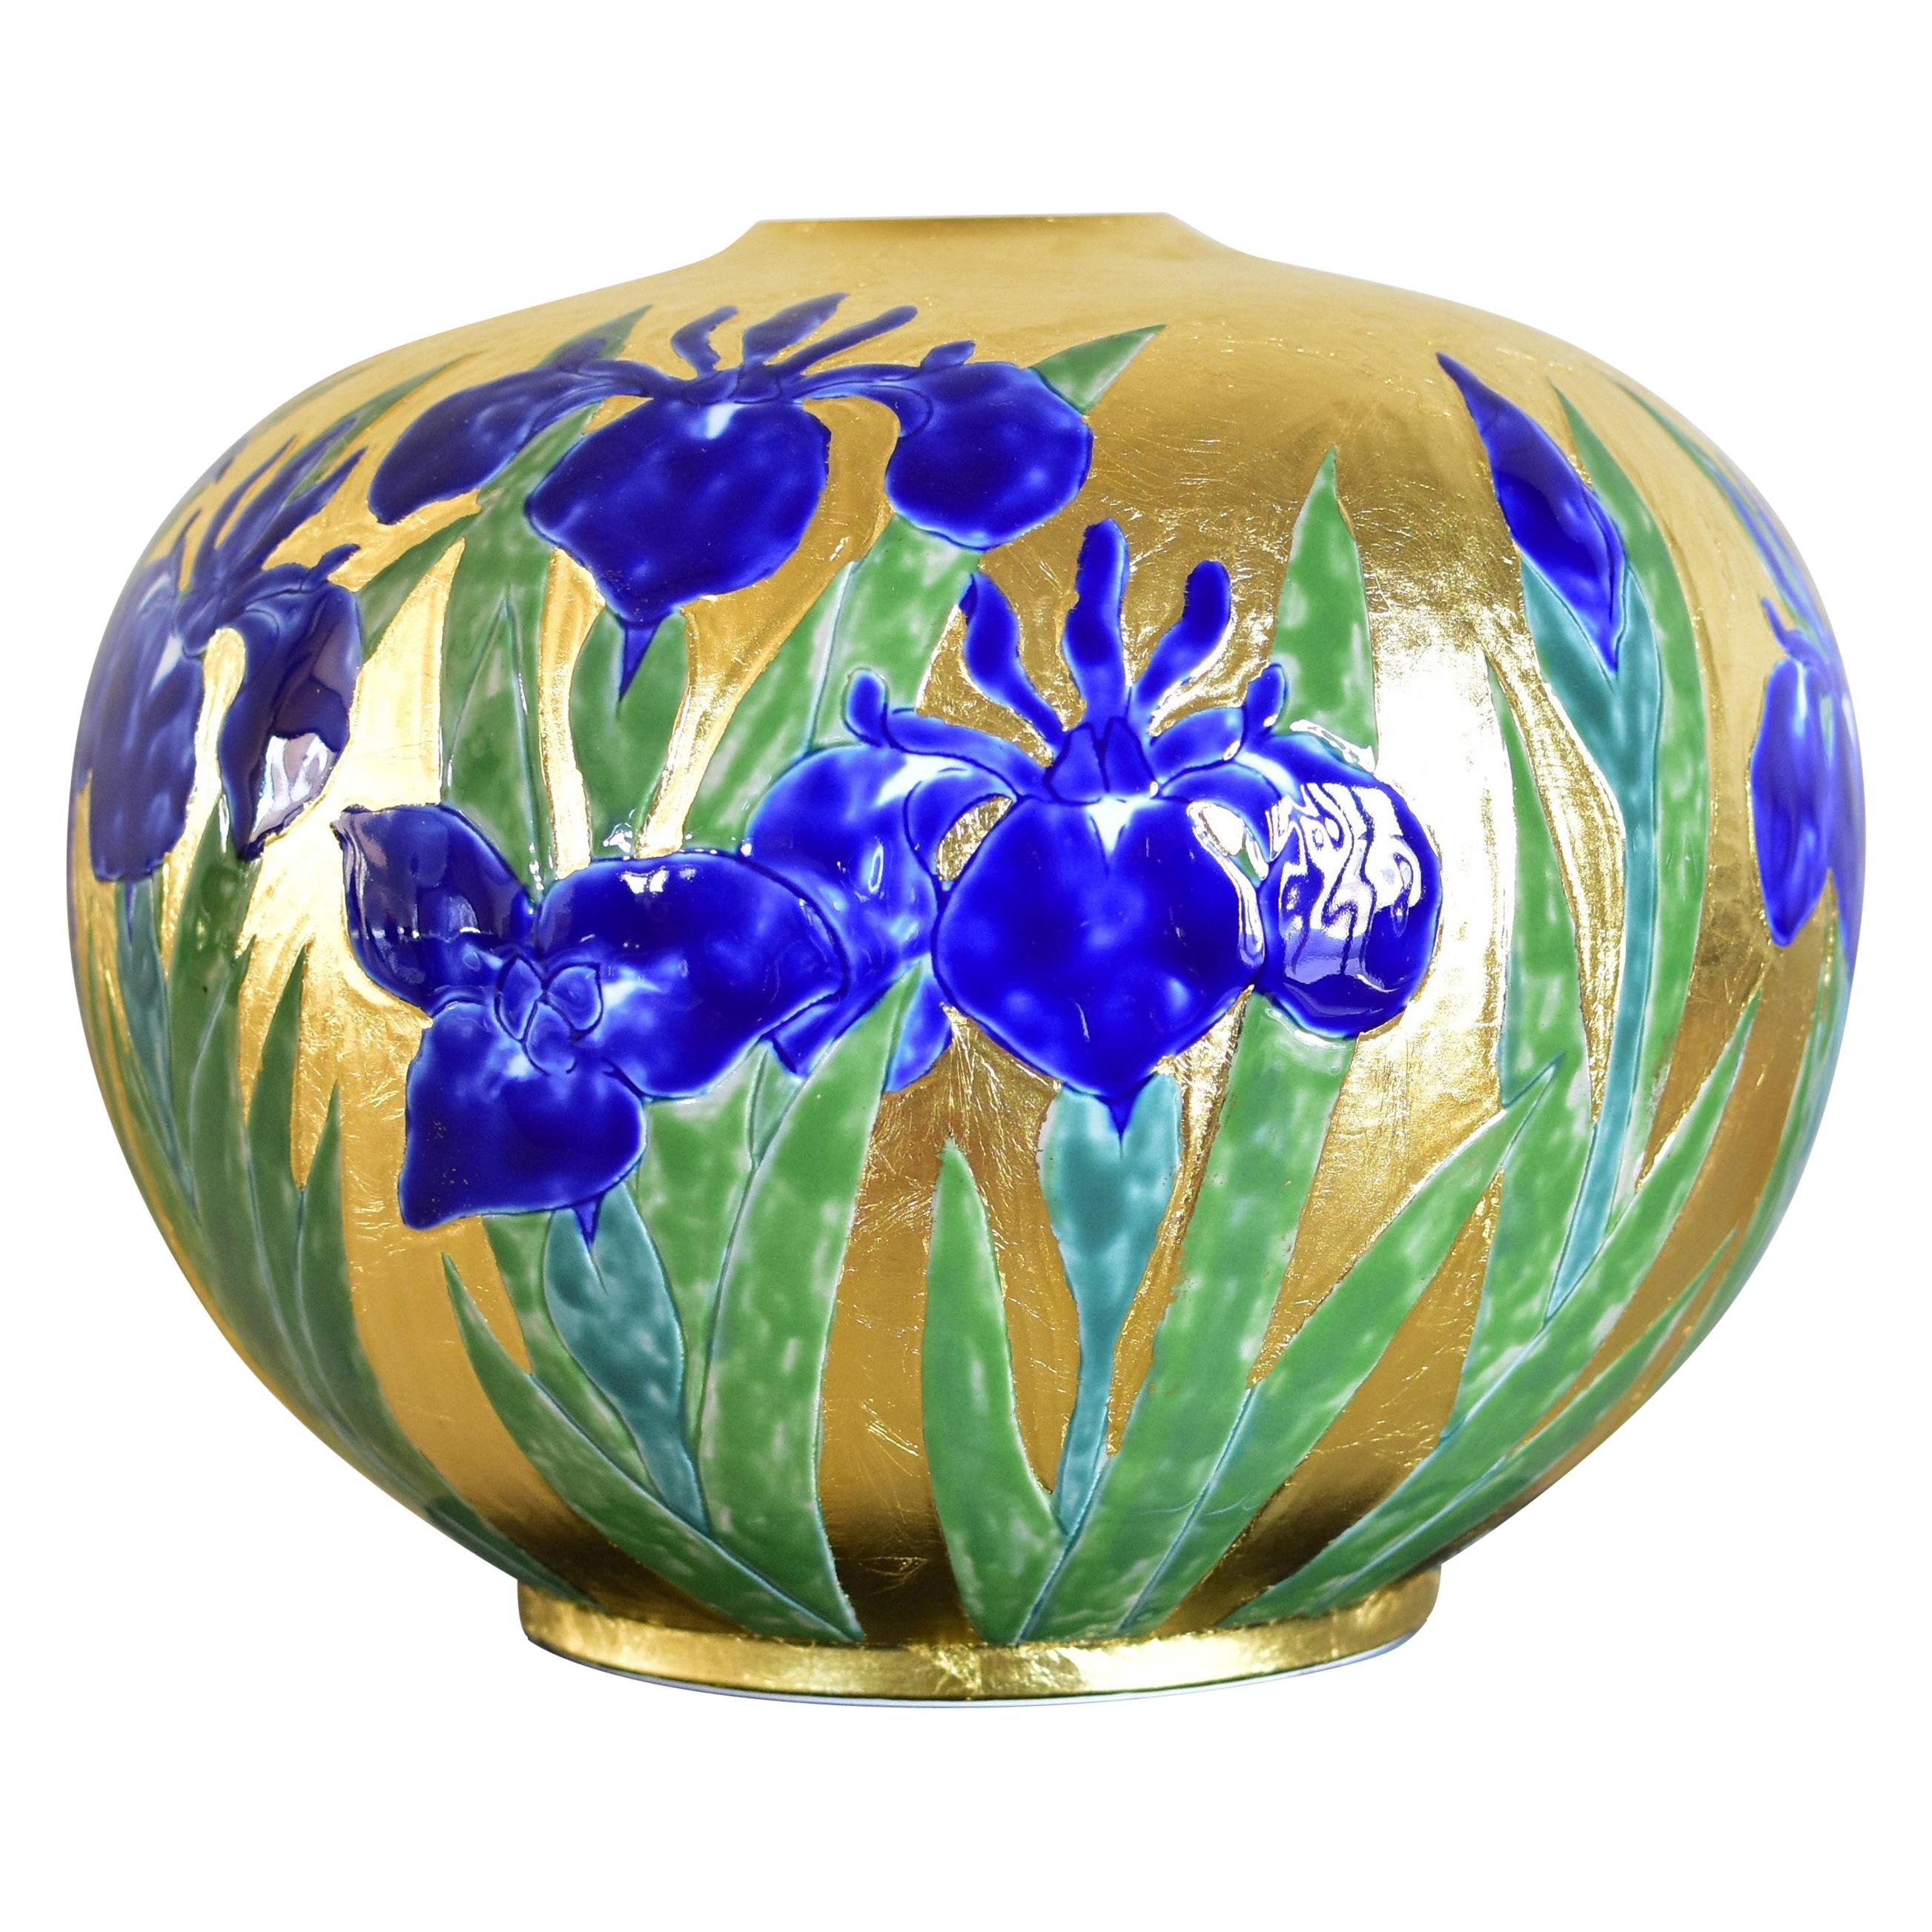 Extraordinary Japanese contemporary museum quality decorative porcelain vase in deep blue and beautiful shades of green on a stunningly shaped body. This is a masterpiece by a third generation master porcelain artit from the Imari-Arita region of